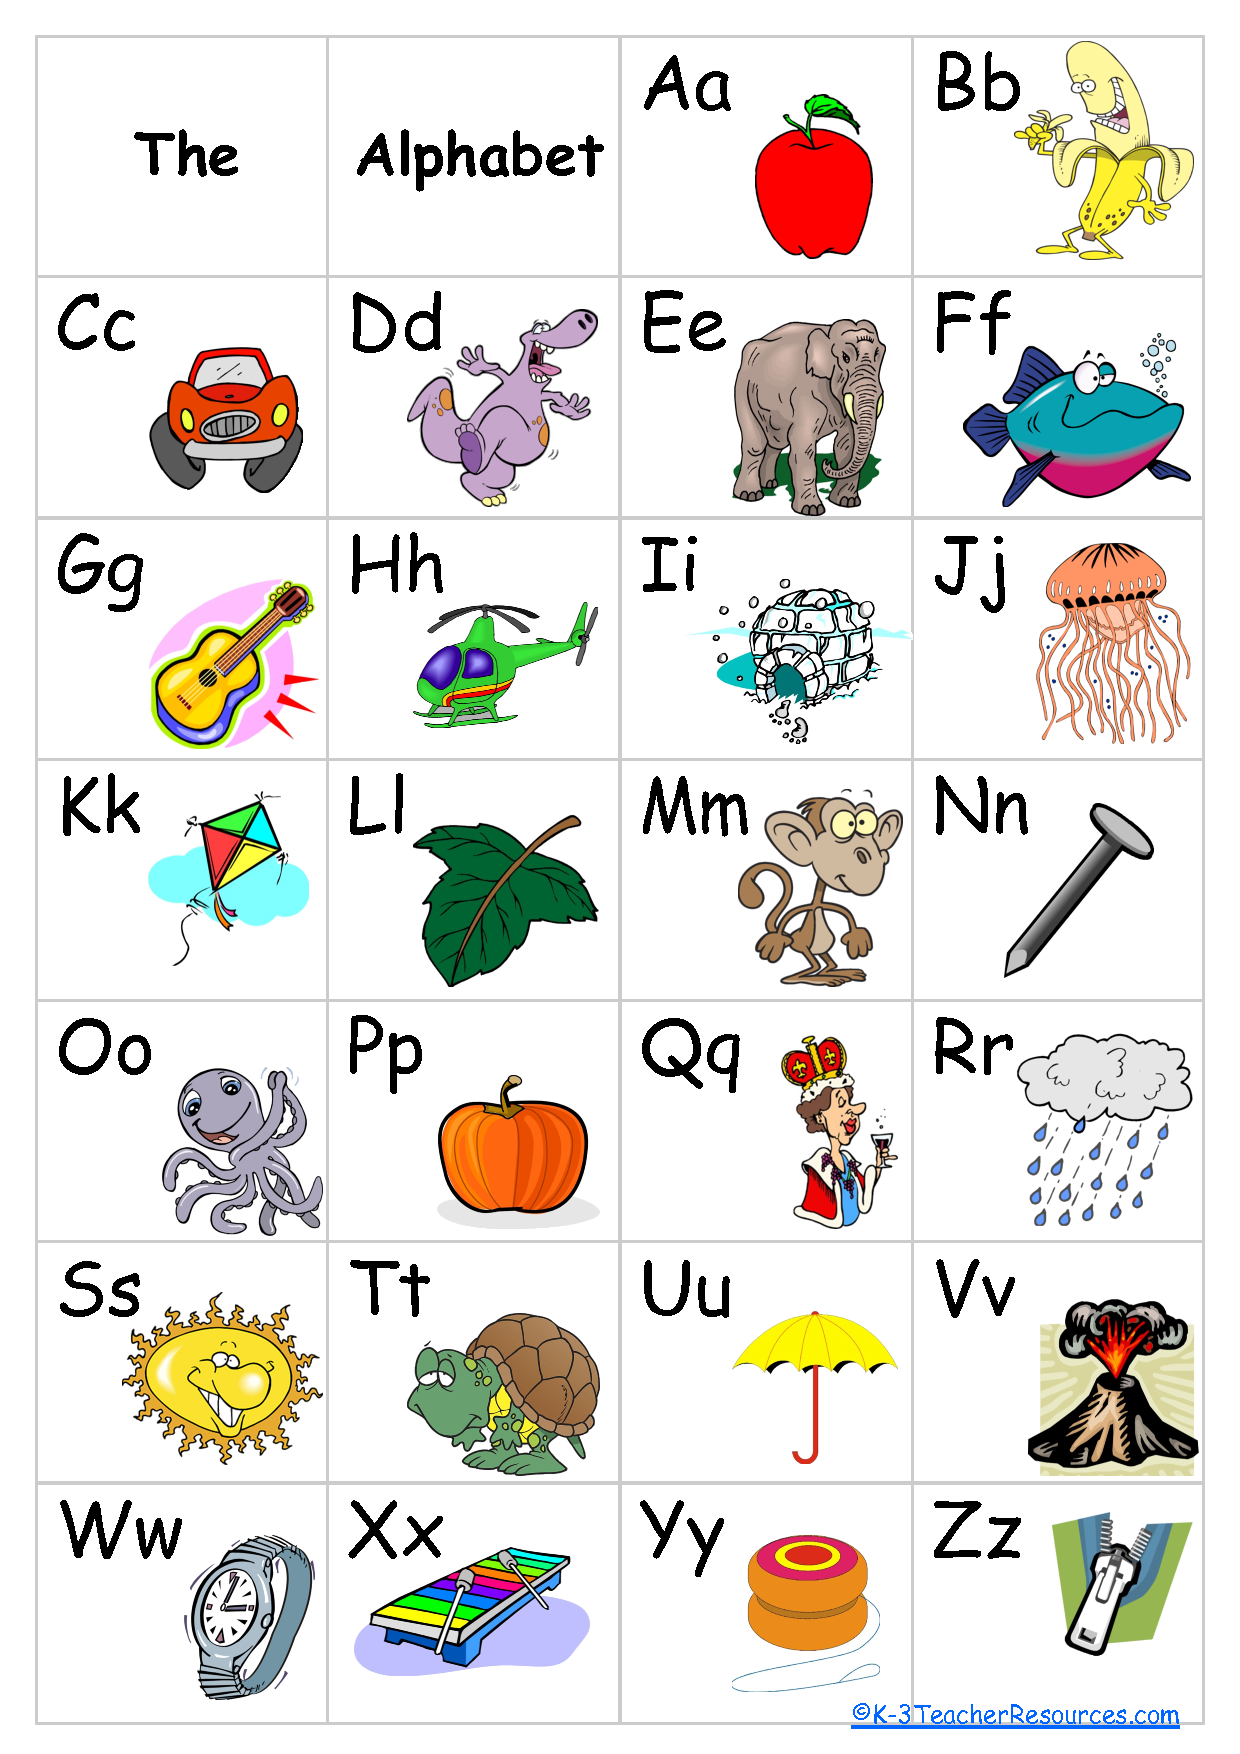 7 Best Images of Student Size Printable Alphabet Chart Printable